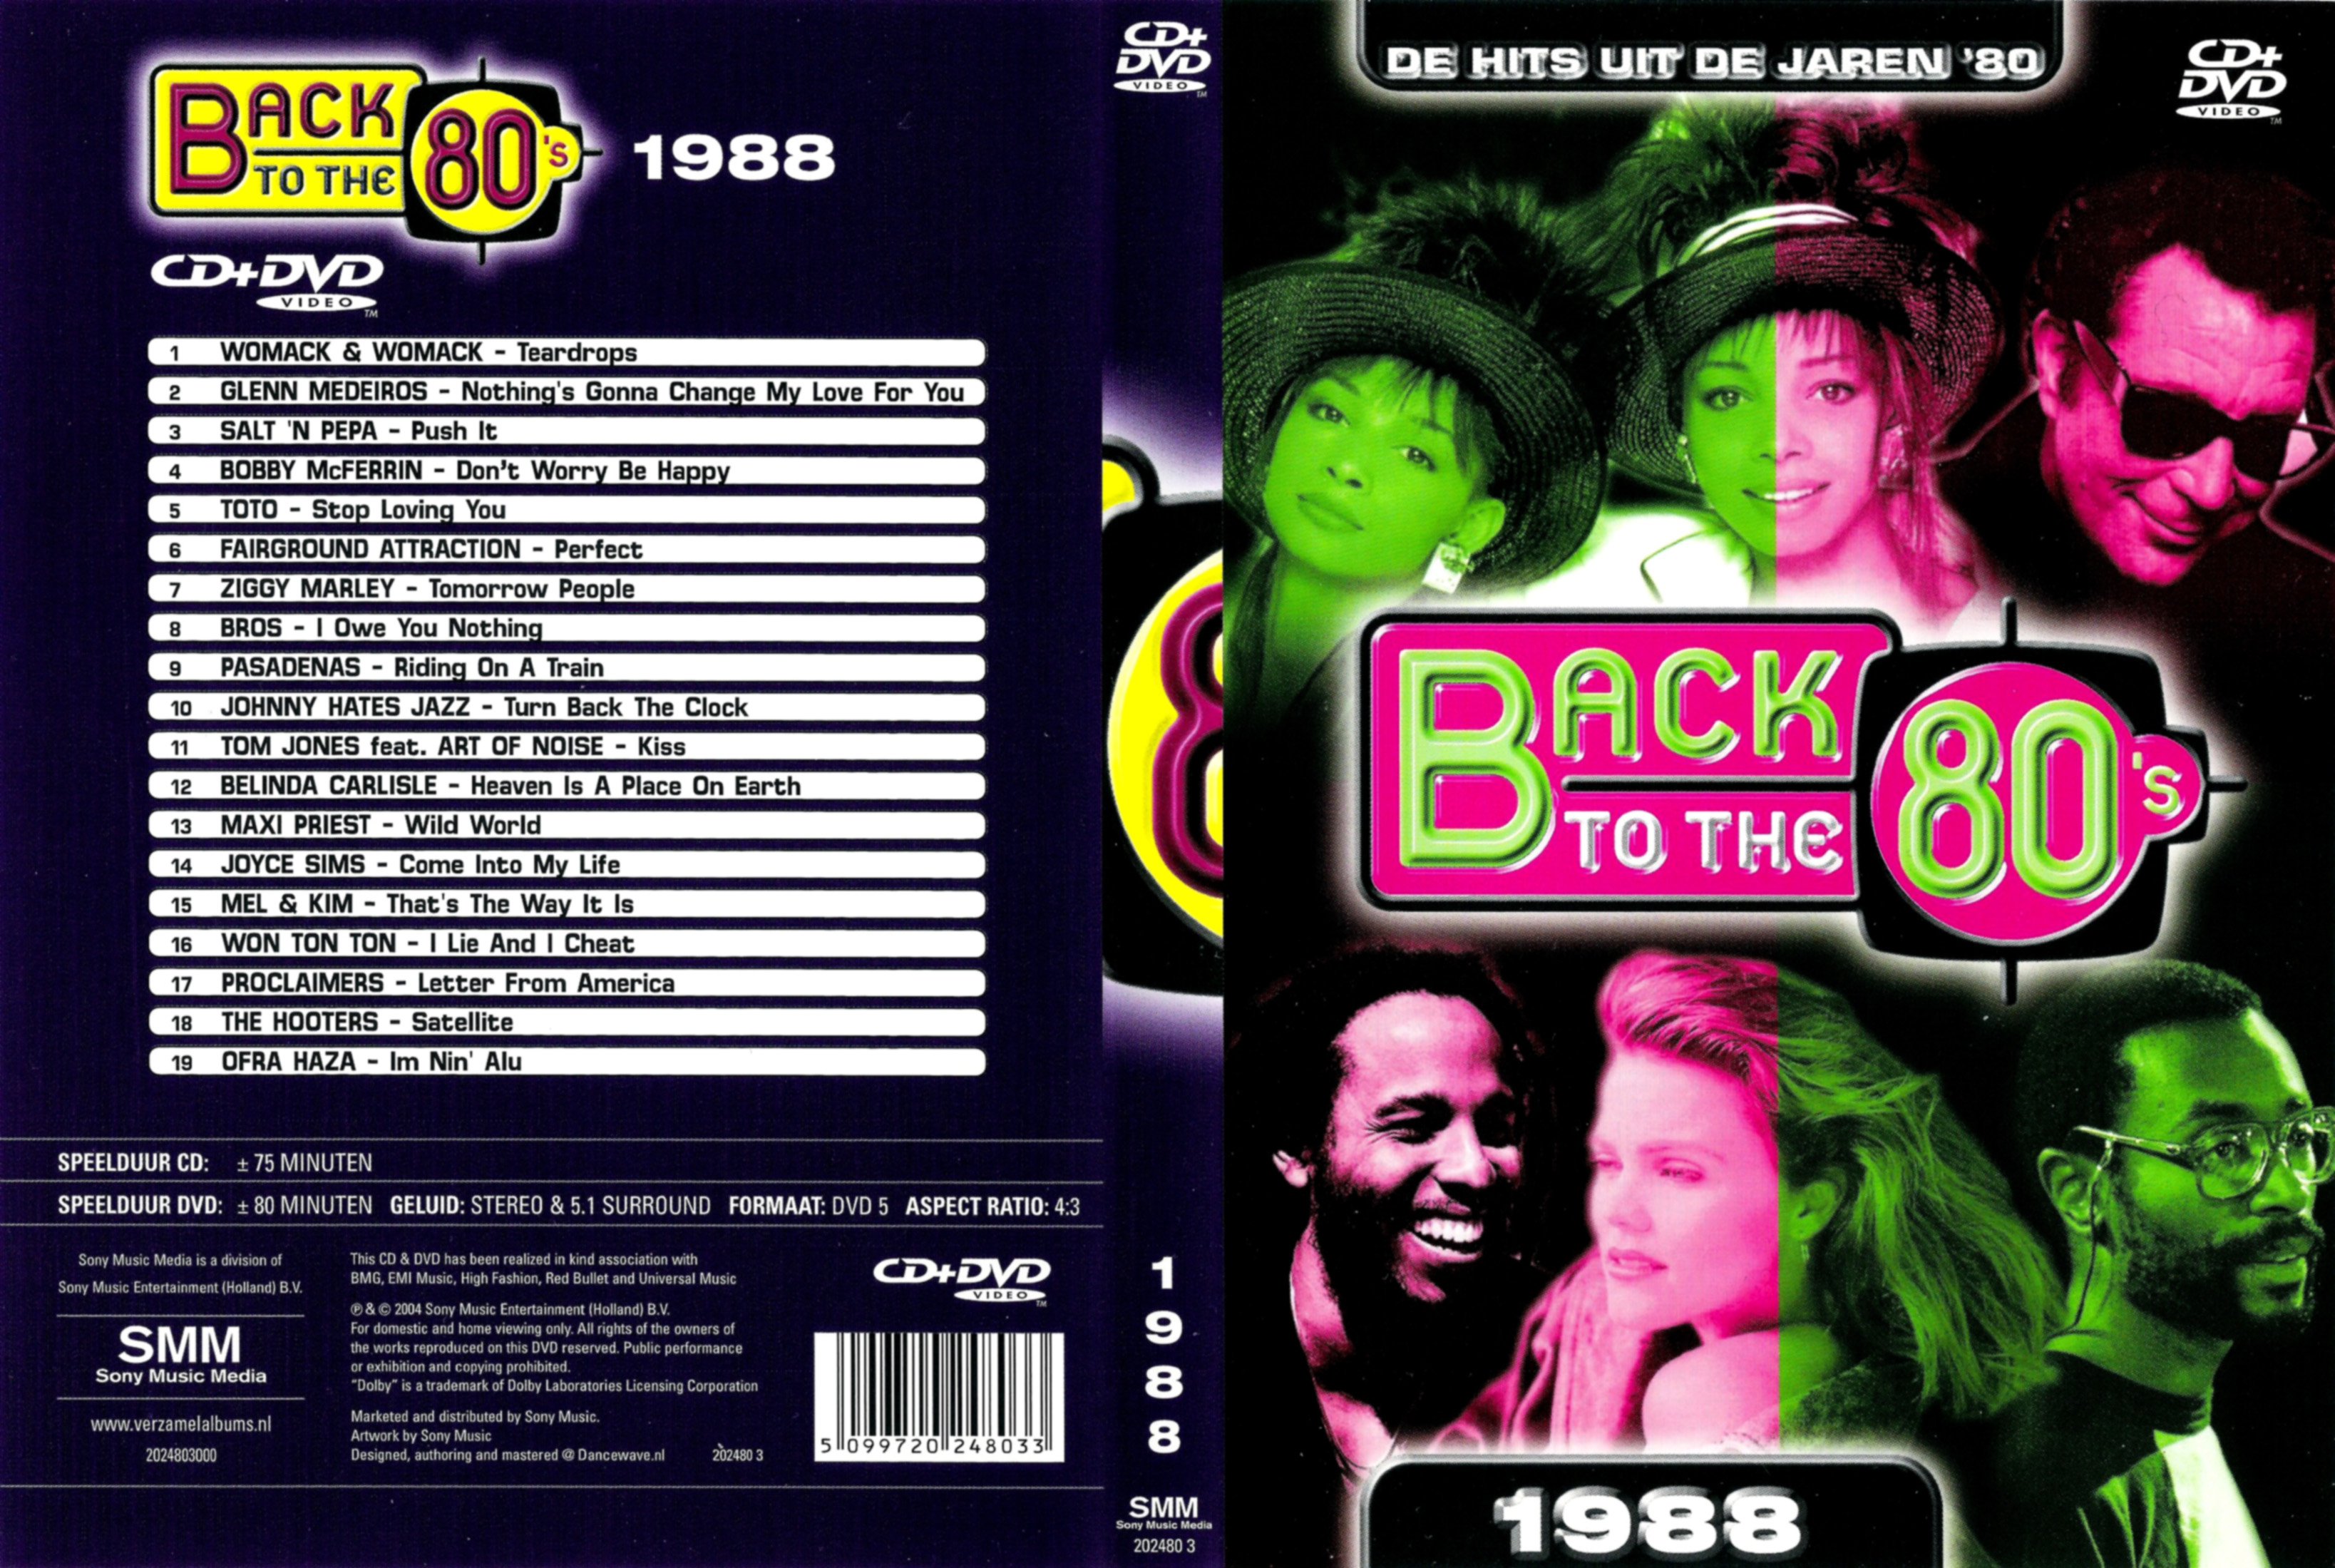 Jaquette DVD Back to the 80